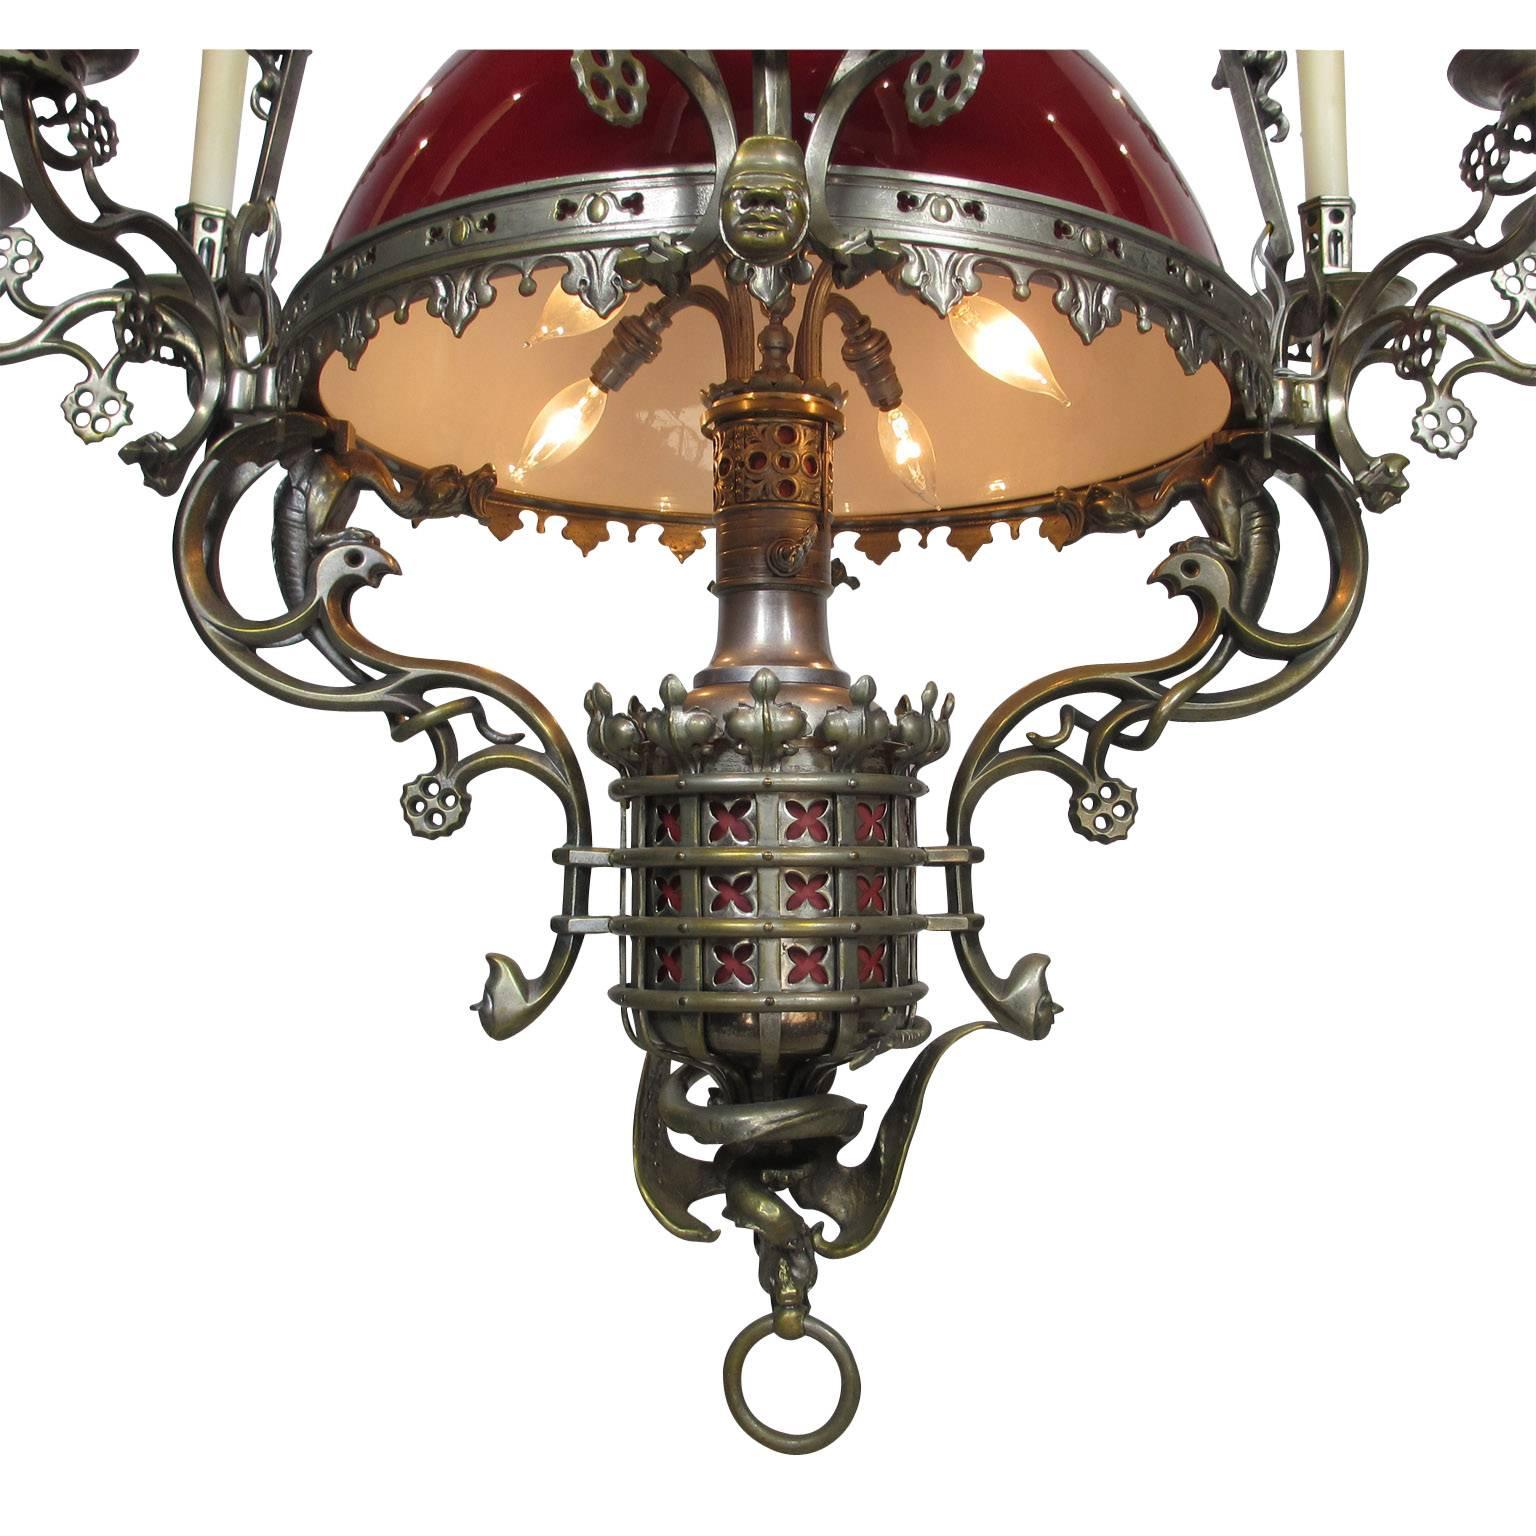 English Large Anglo-French 19th-20th Century Gothic-Revival Style Figural Chandelier